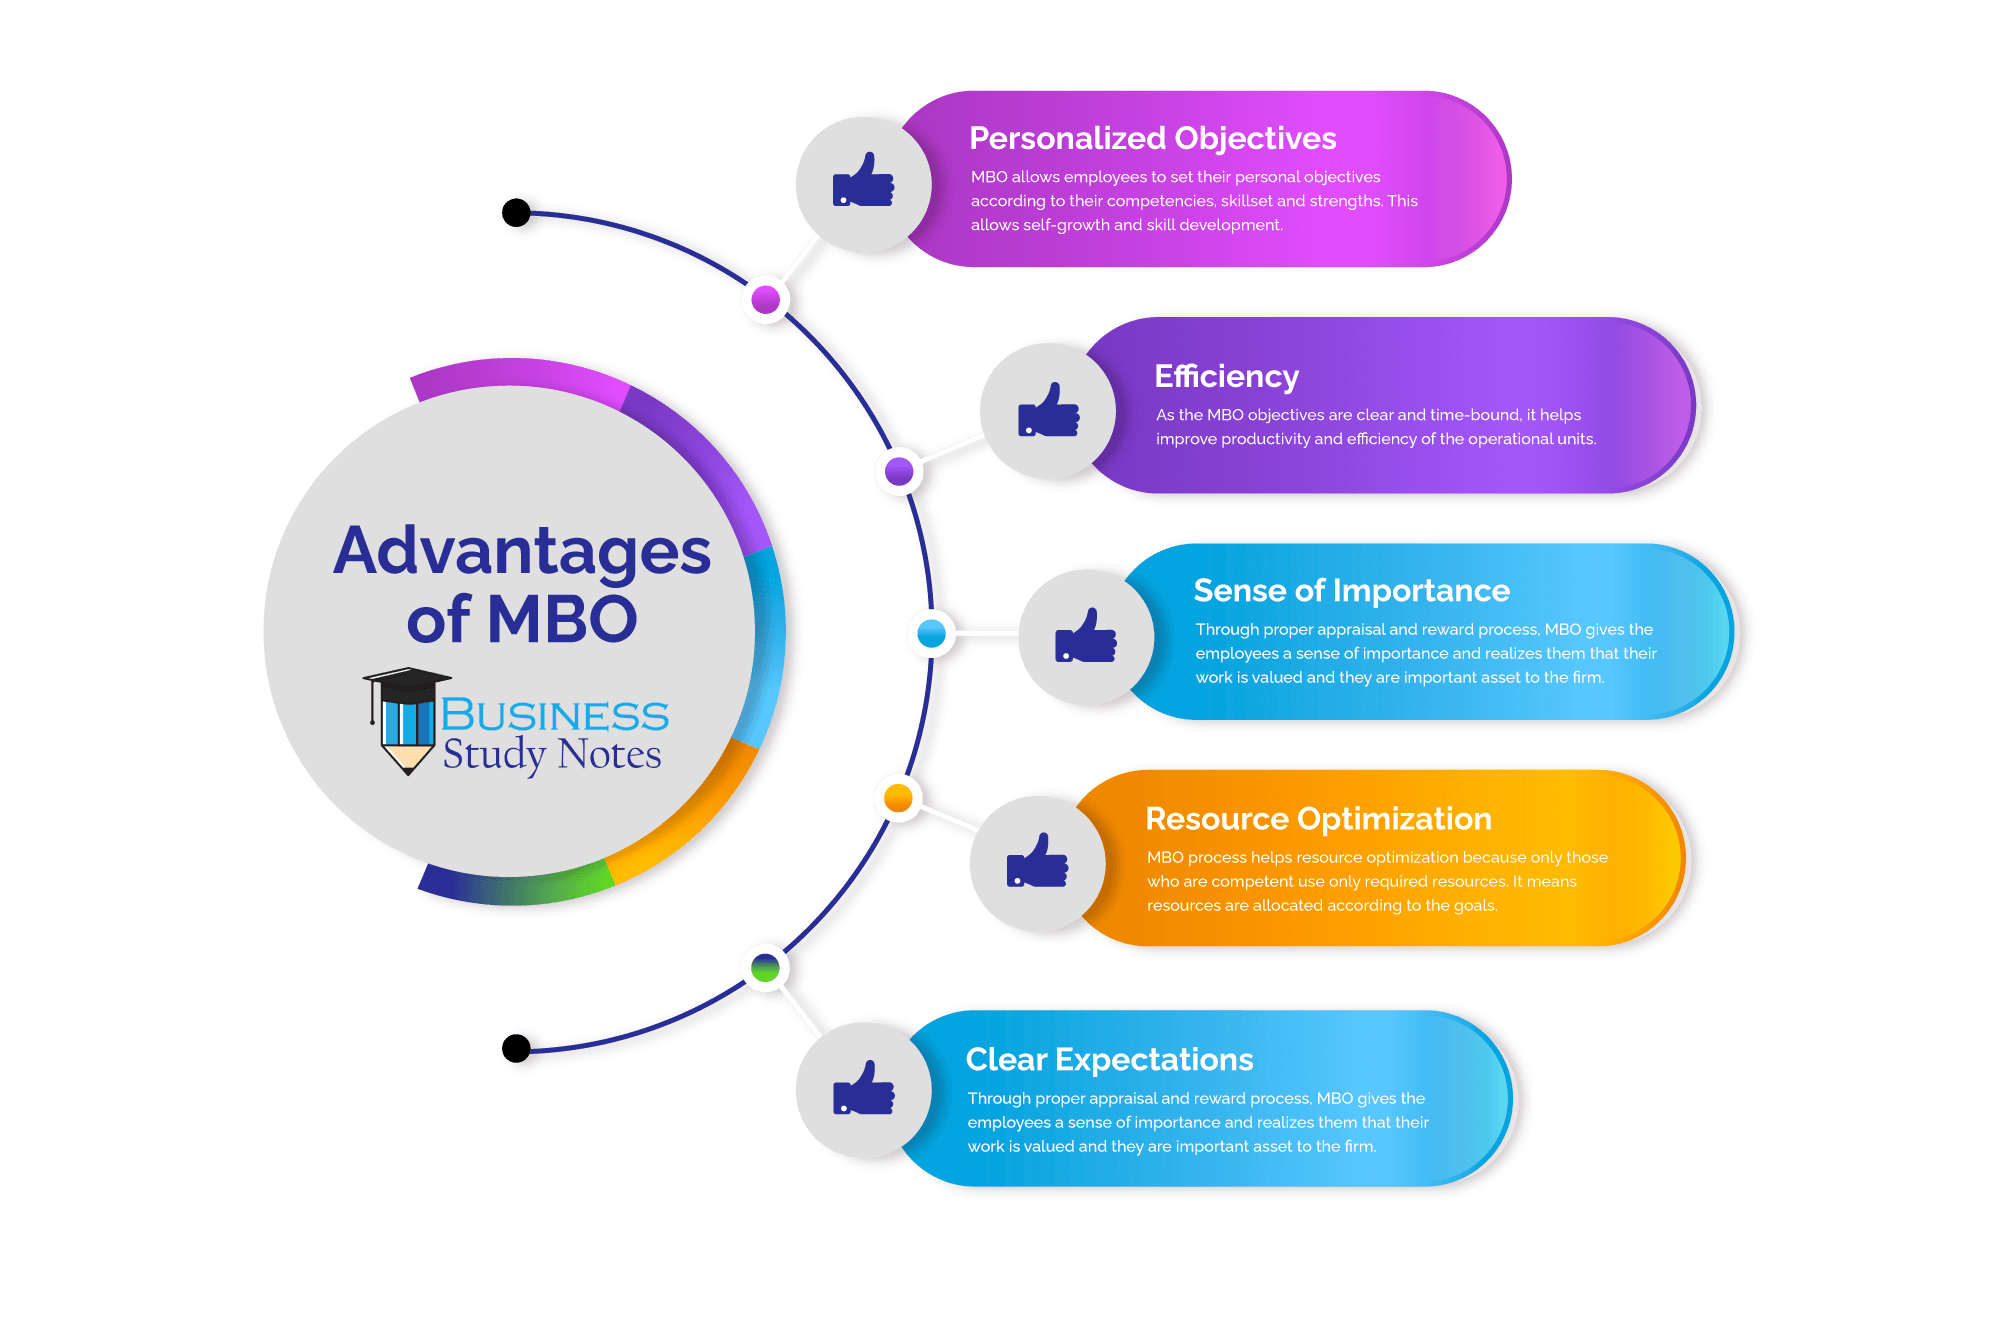 Advantages of MBO